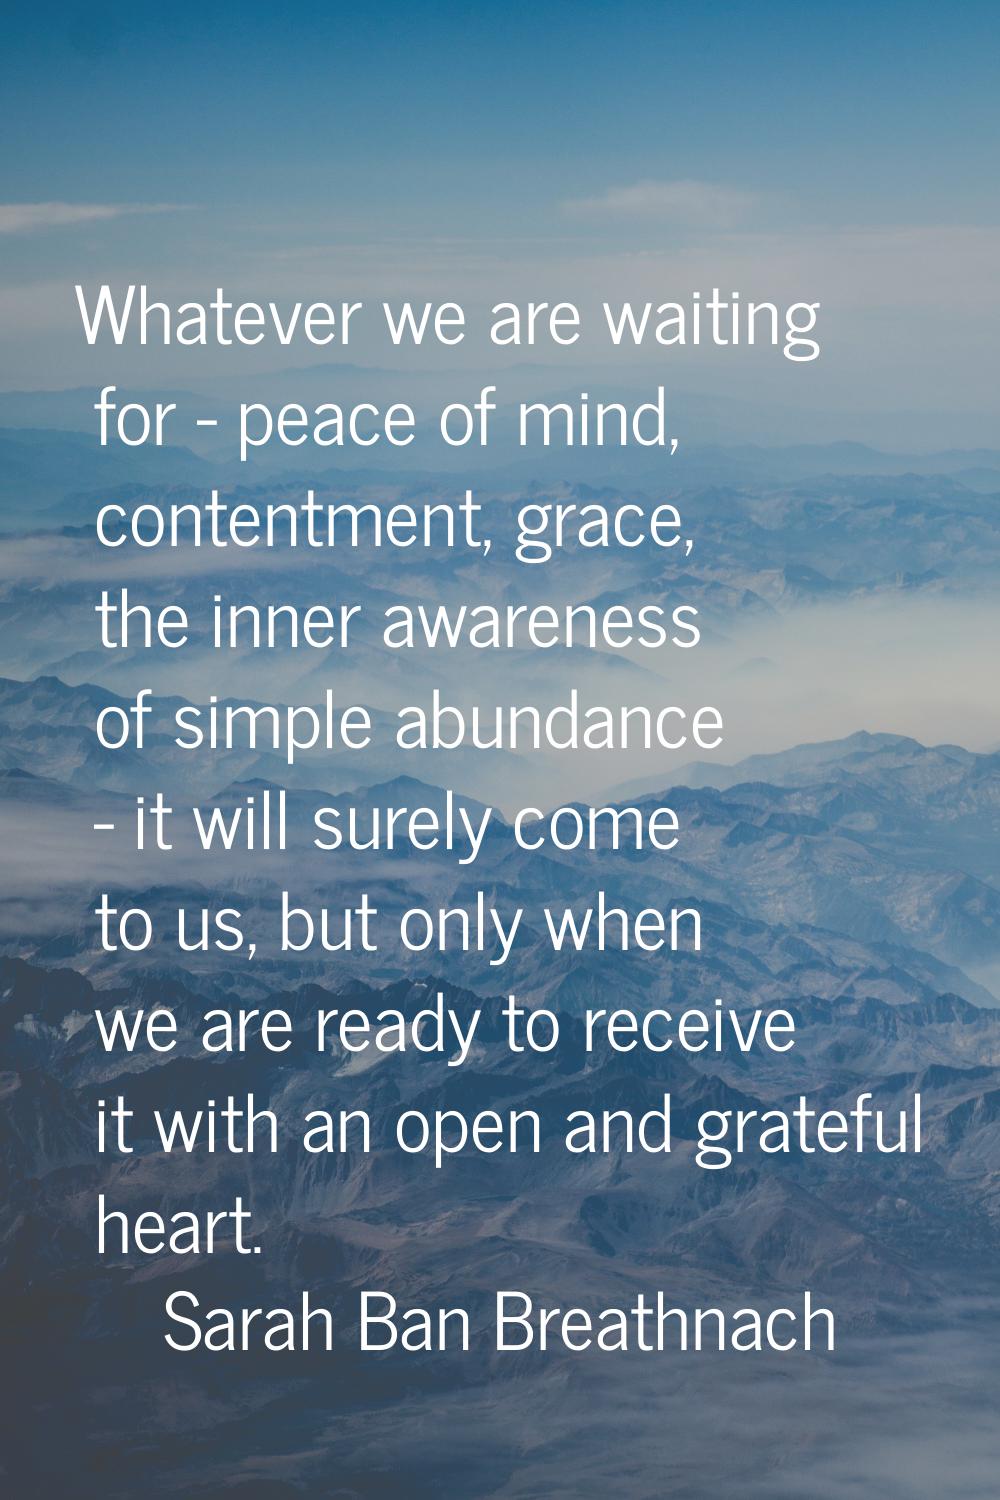 Whatever we are waiting for - peace of mind, contentment, grace, the inner awareness of simple abun